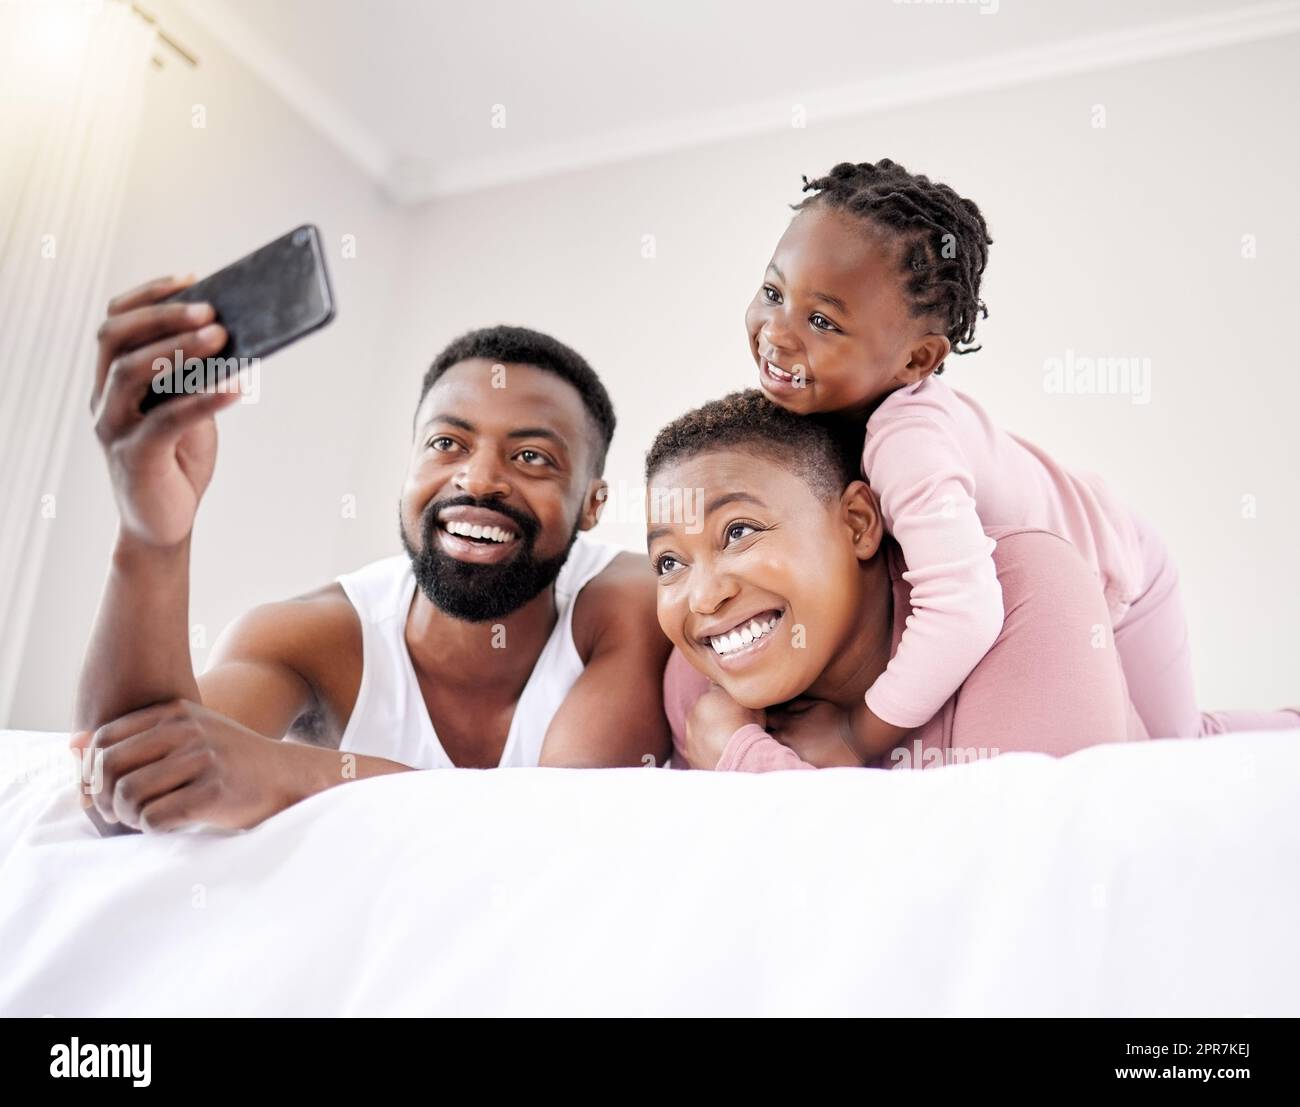 Show the world my jewels. a young family bonding in bed together. Stock Photo